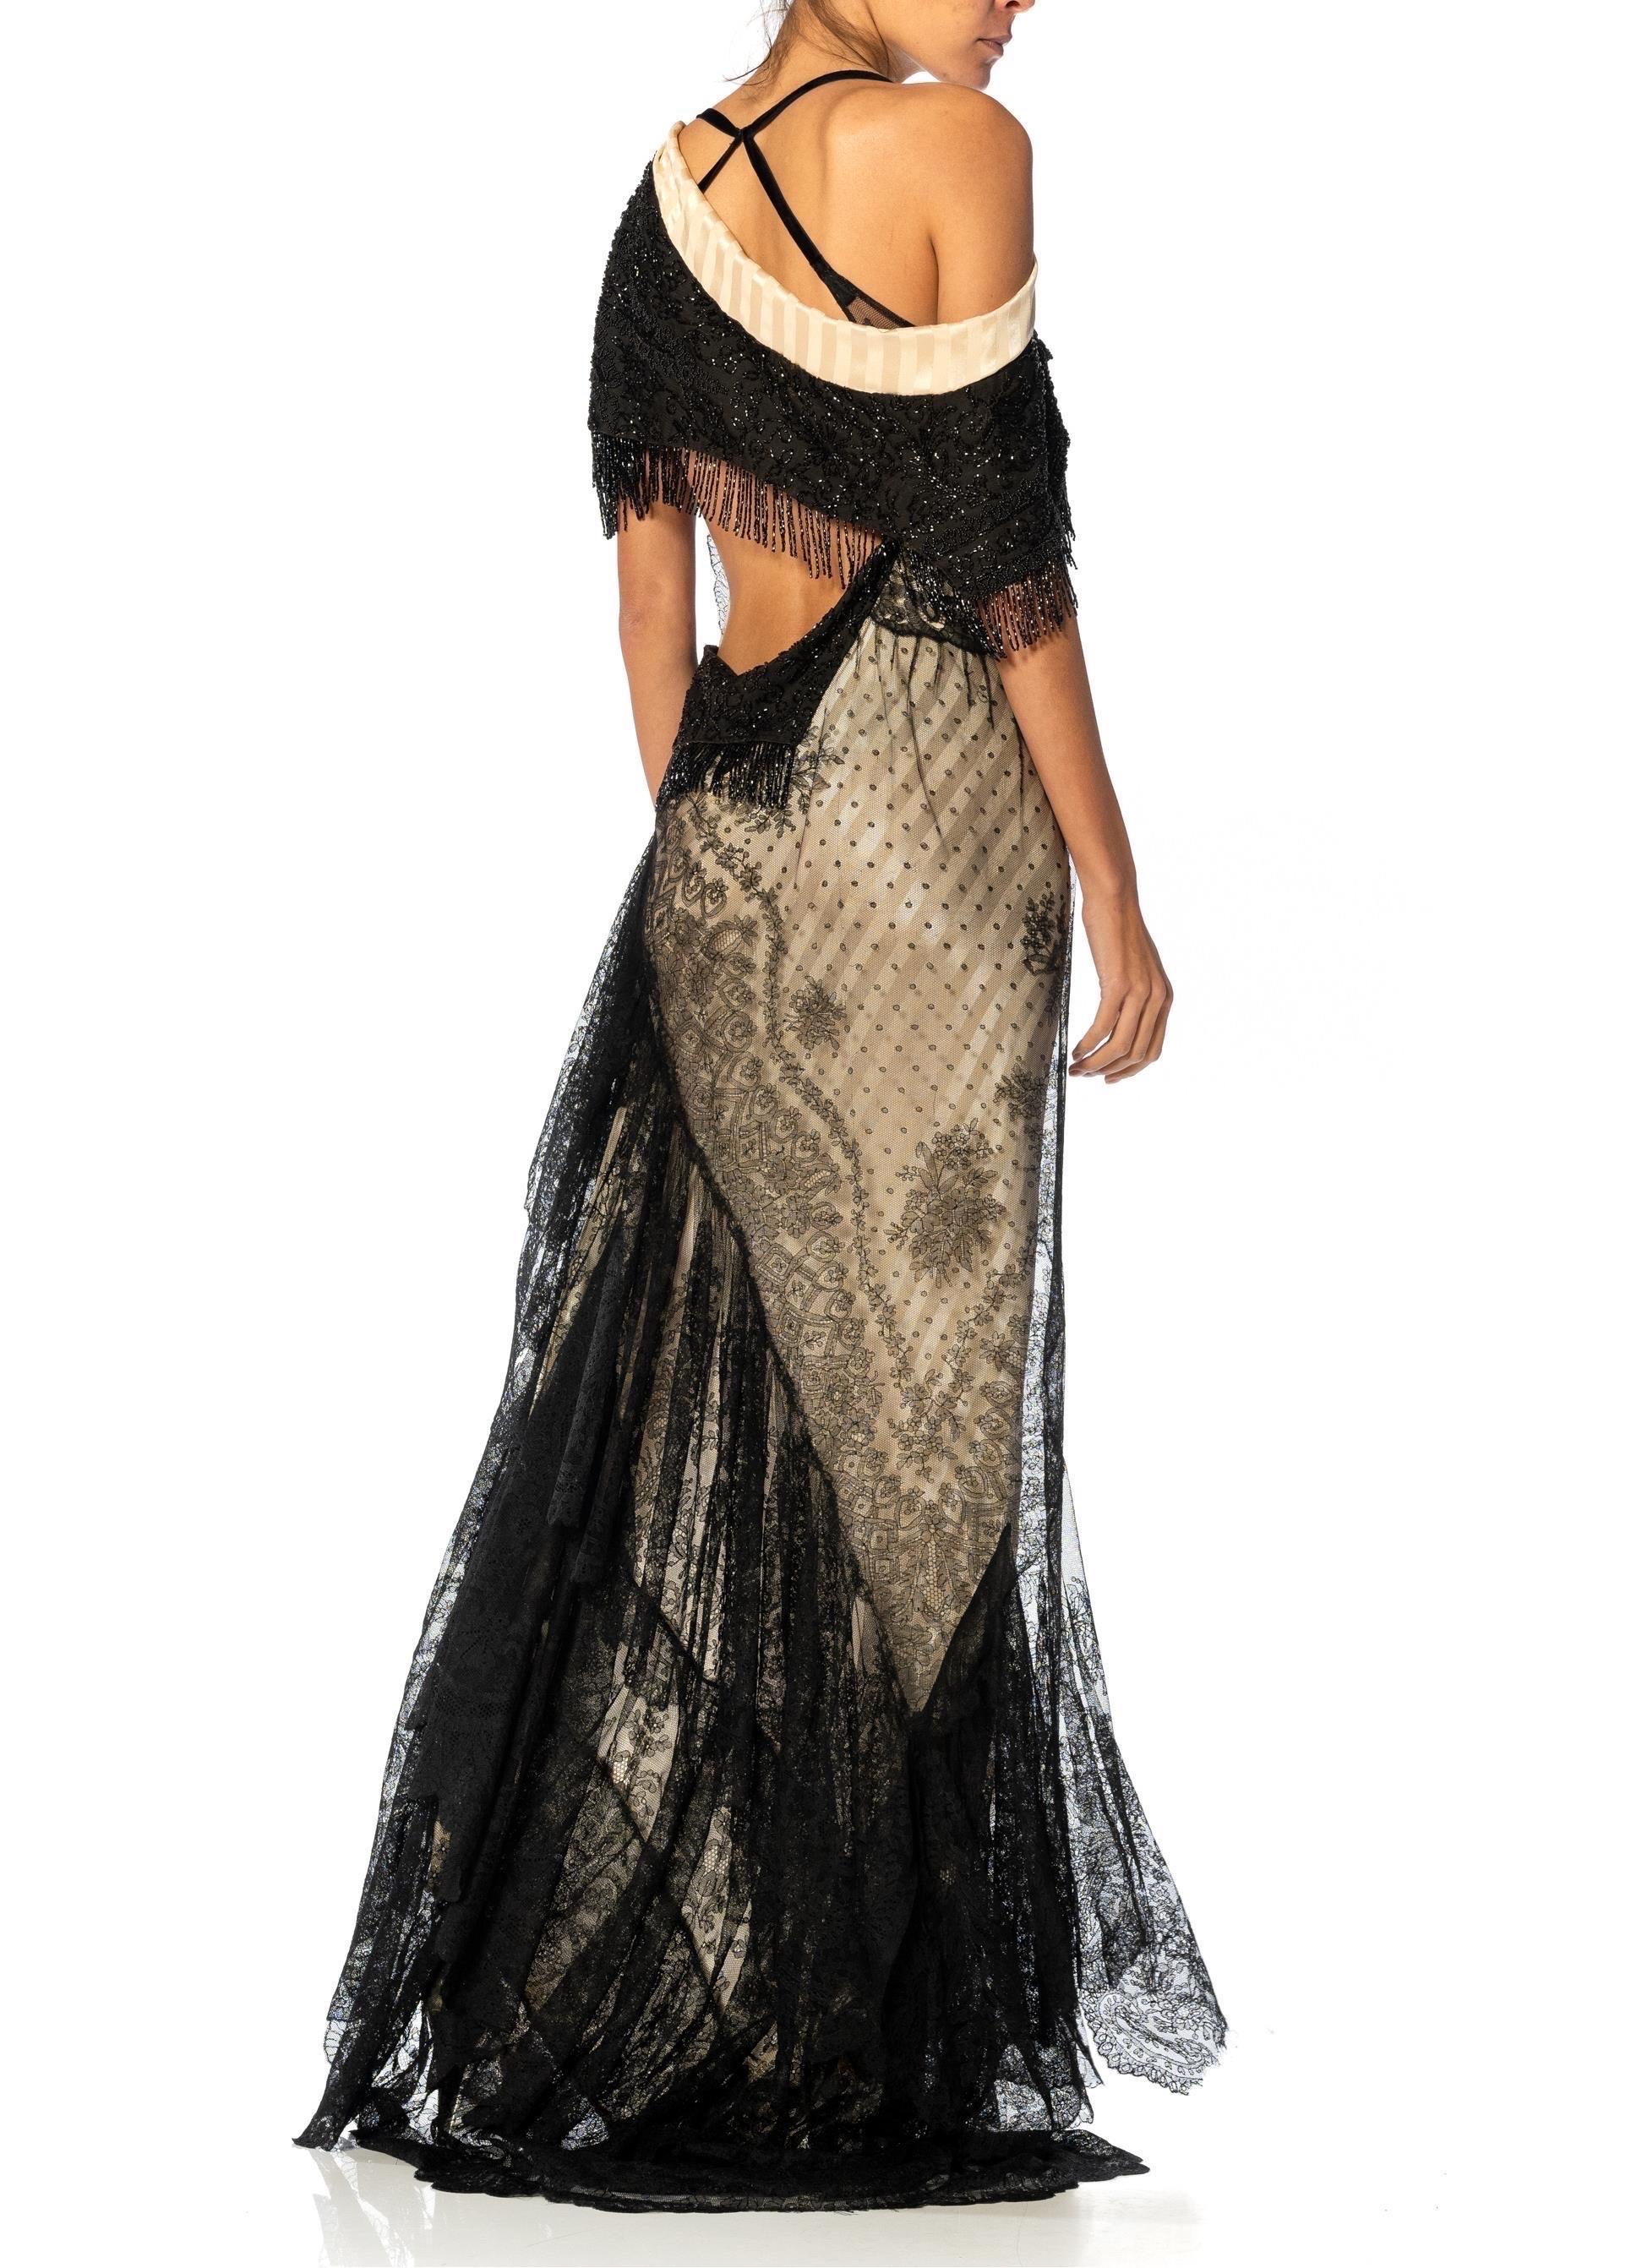 MORPHEW ATELIER Black & Cream Silk Chantilly Lace Trained Gown With Victorian B For Sale 2